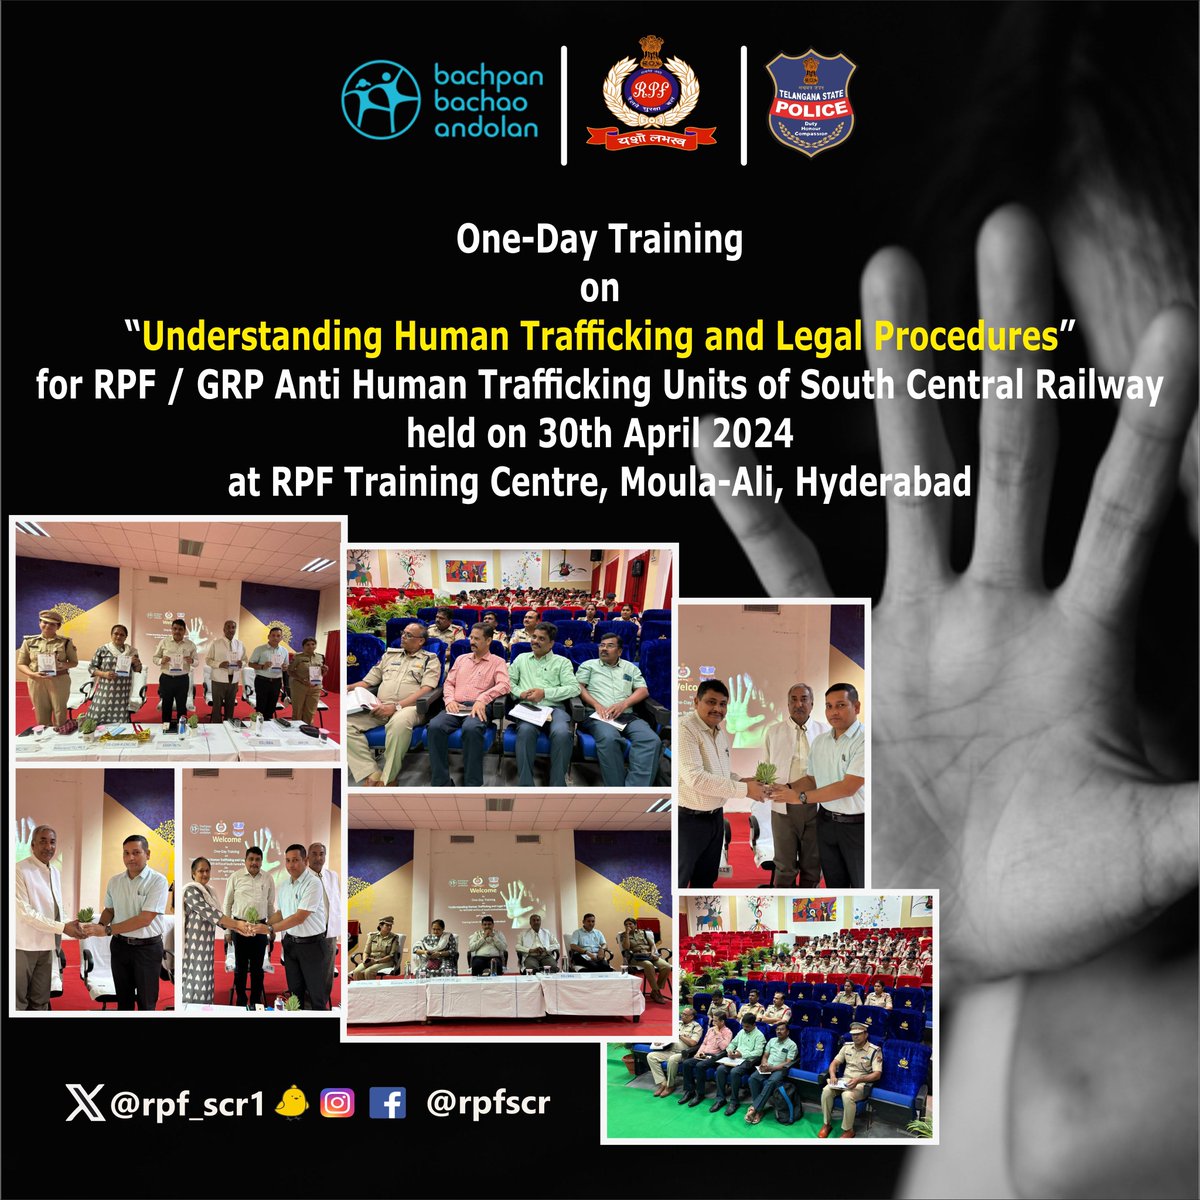 Taking a stand against #HumanTrafficking, @rpf_scr1 hosted a one-day training session on 'Understanding Human Trafficking & Legal Procedures', enlightening 98 officers/staff from #RPF & #GRP. Together, let's empower and educate for a safer world! #EndTrafficking @RPF_INDIA